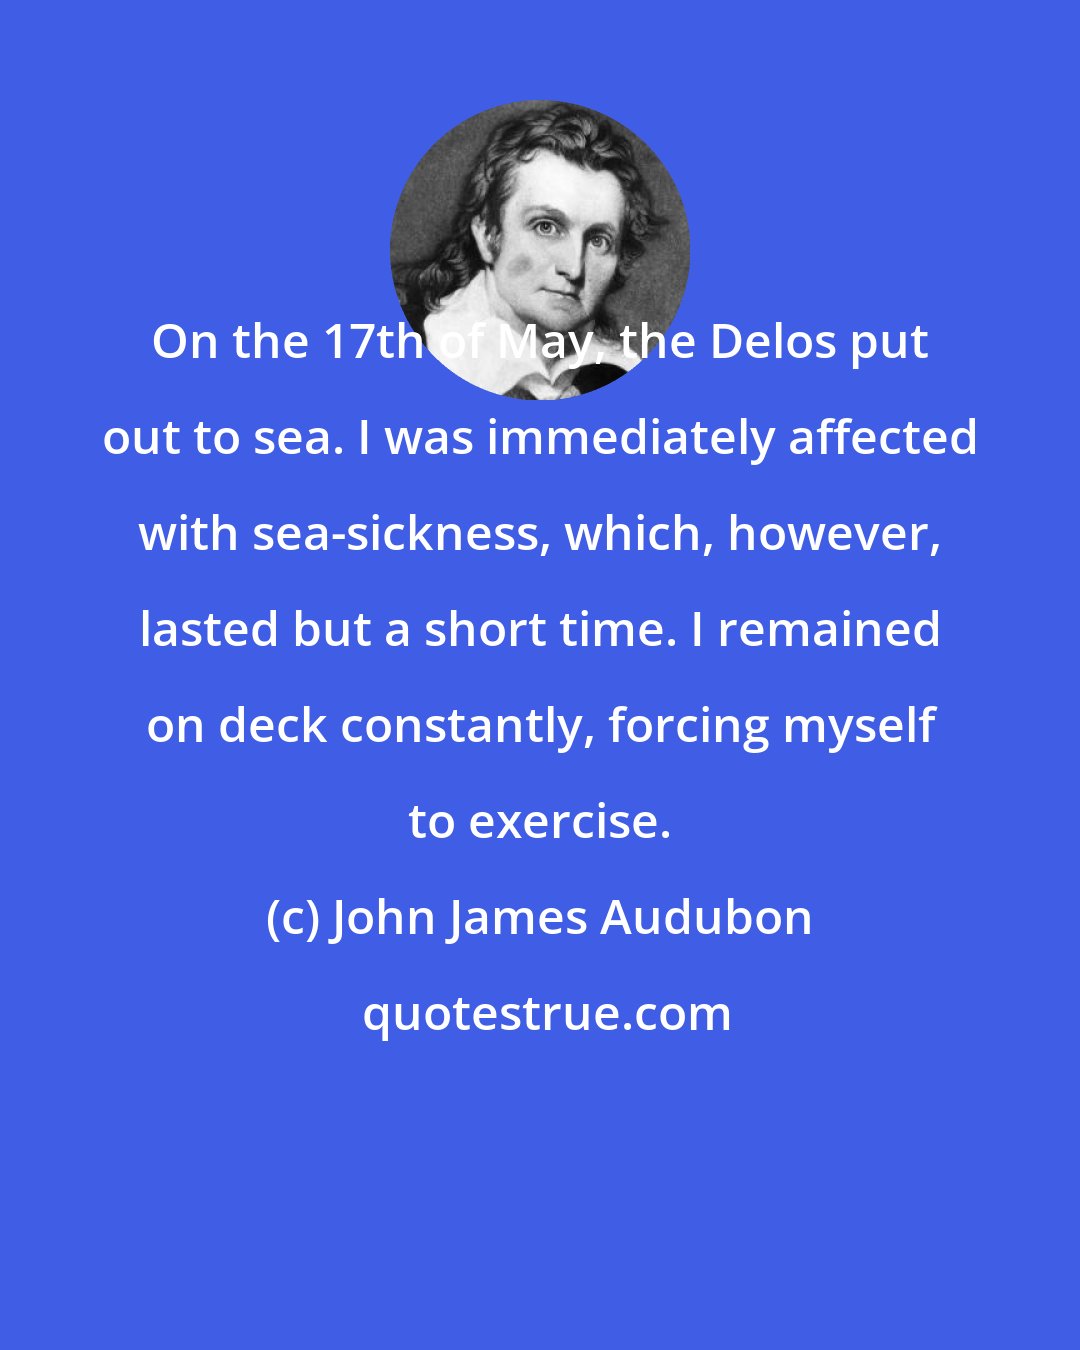 John James Audubon: On the 17th of May, the Delos put out to sea. I was immediately affected with sea-sickness, which, however, lasted but a short time. I remained on deck constantly, forcing myself to exercise.